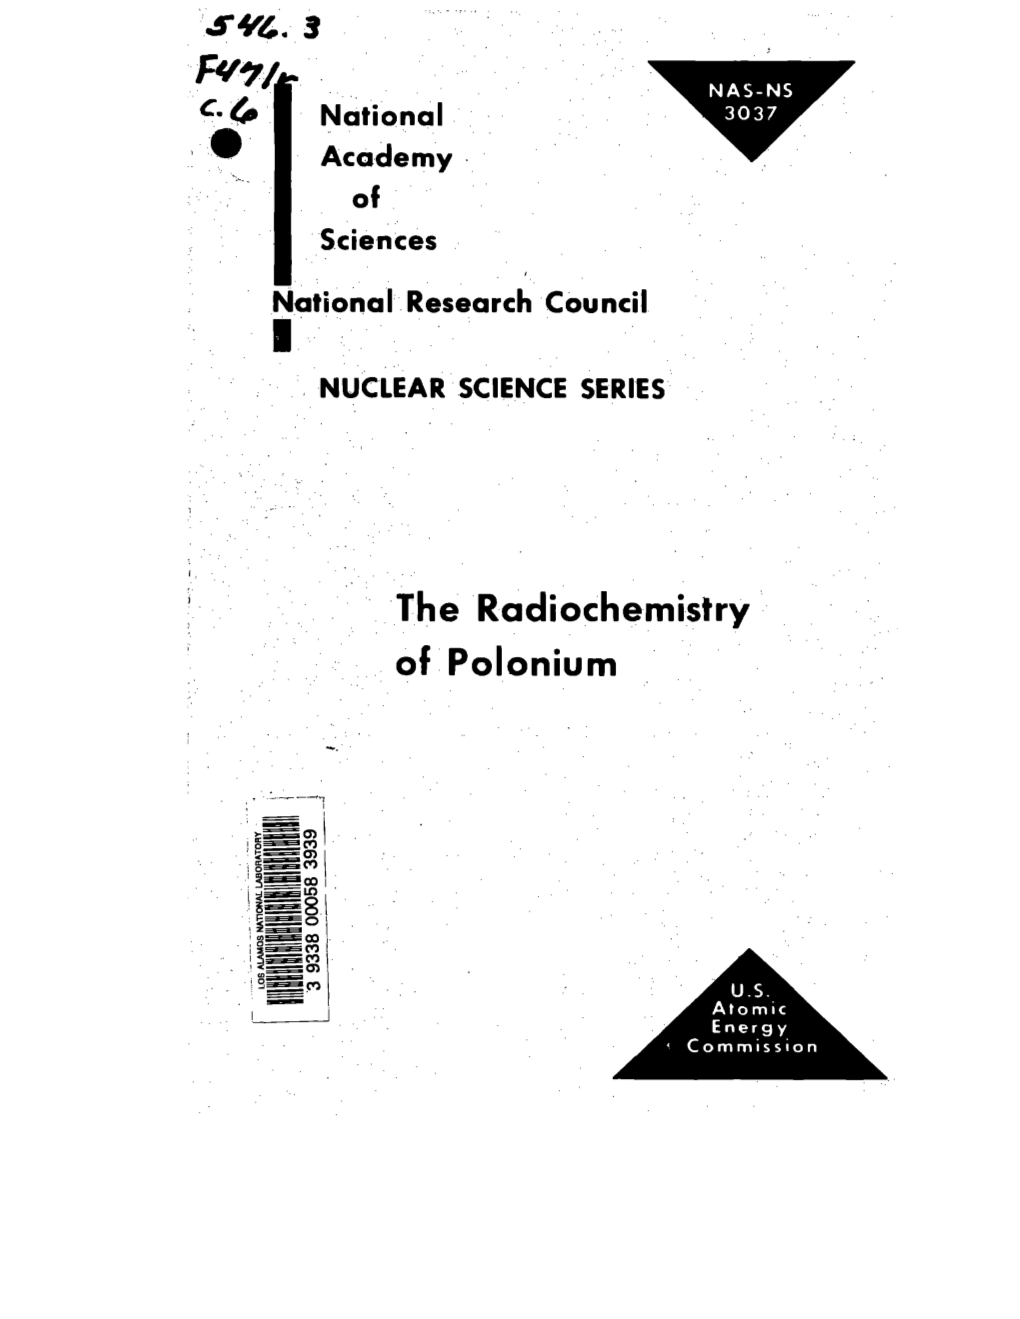 The Radiochemistry of Polonium COMMITTEE on NUCLEAR SCIENCE